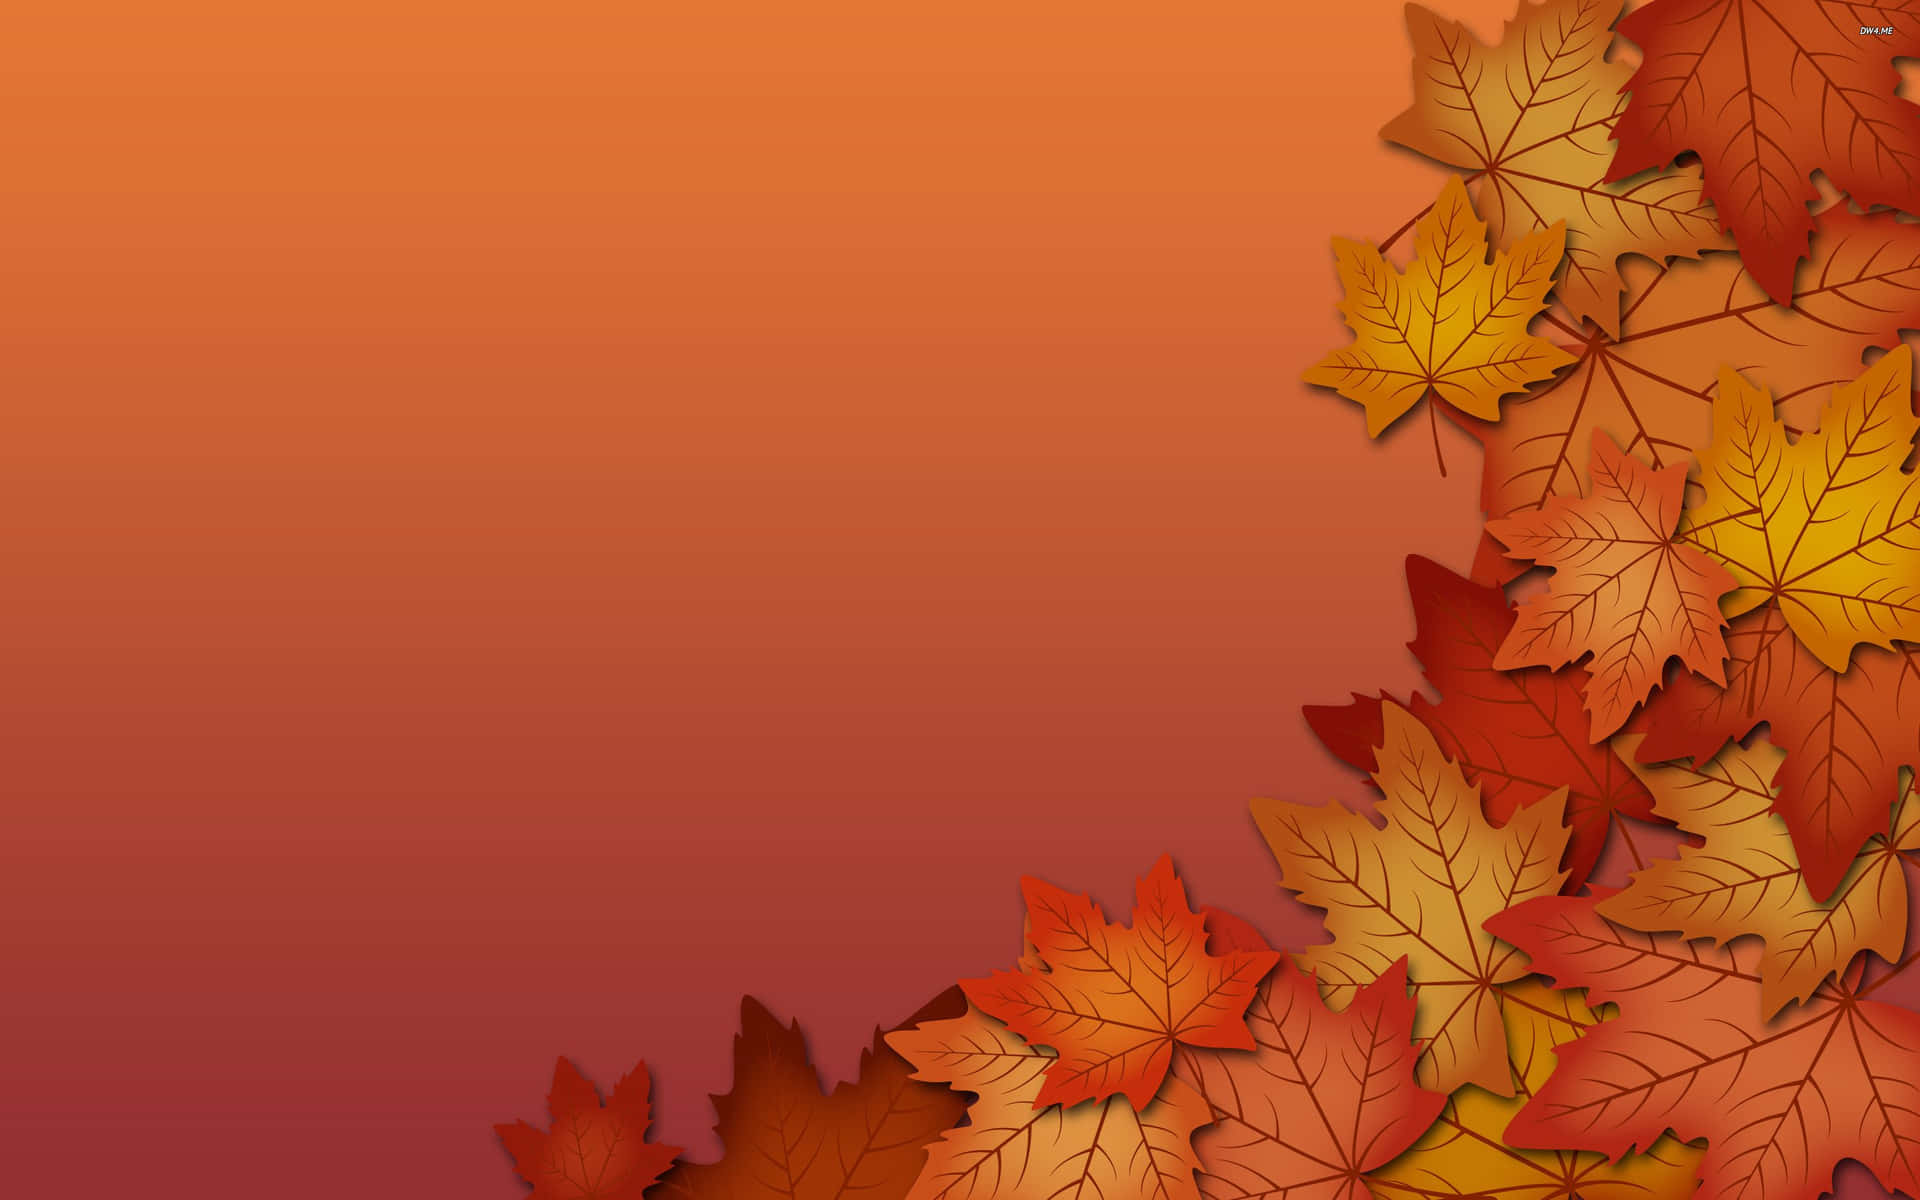 “Take in the vibrant fall colors” Wallpaper